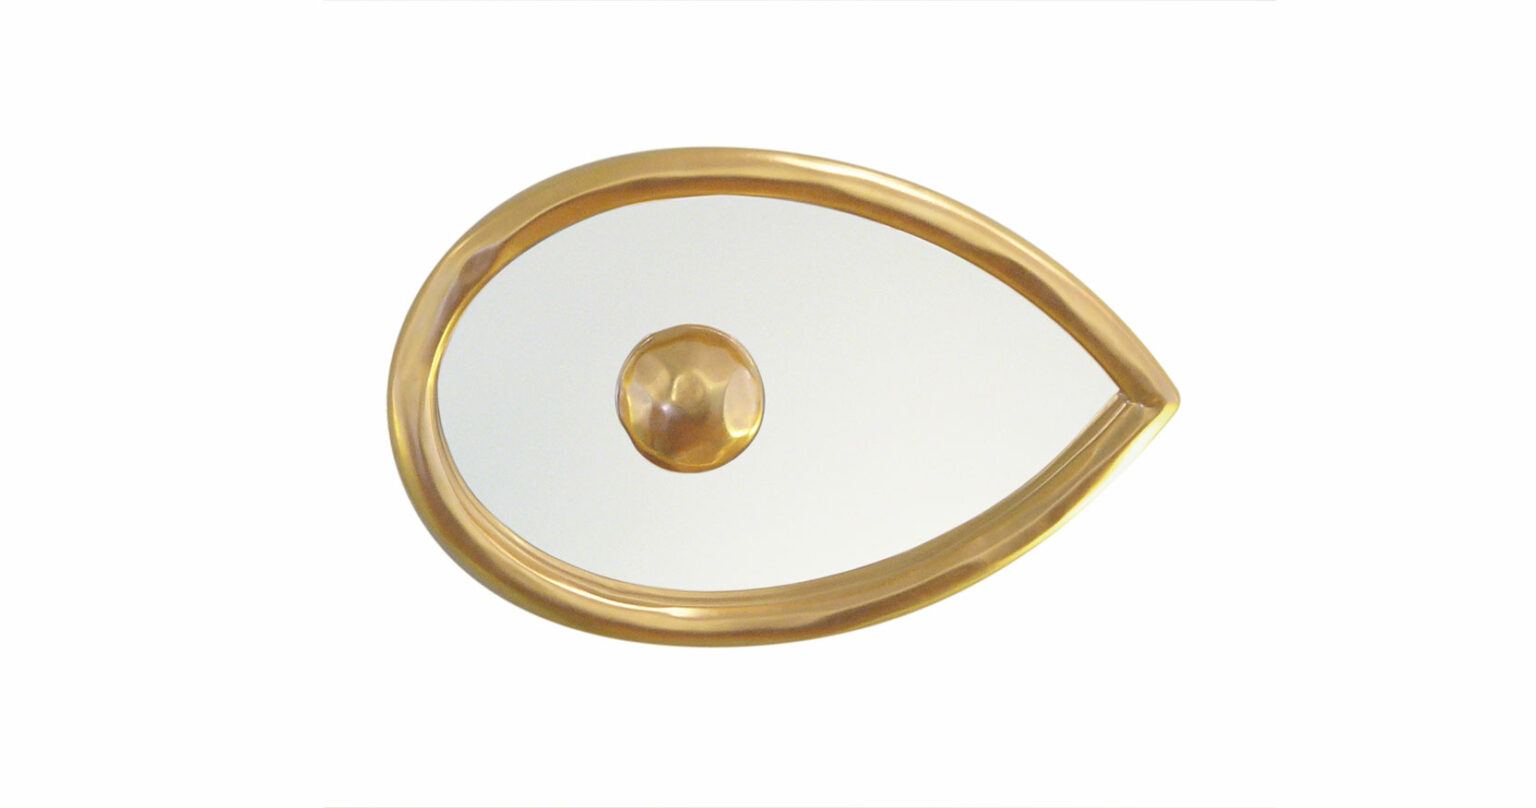 Elizabeth Garouste, surrealist golden mirror encased in a sculpted wood en frame in the shape of an eye with a pupil in the middle